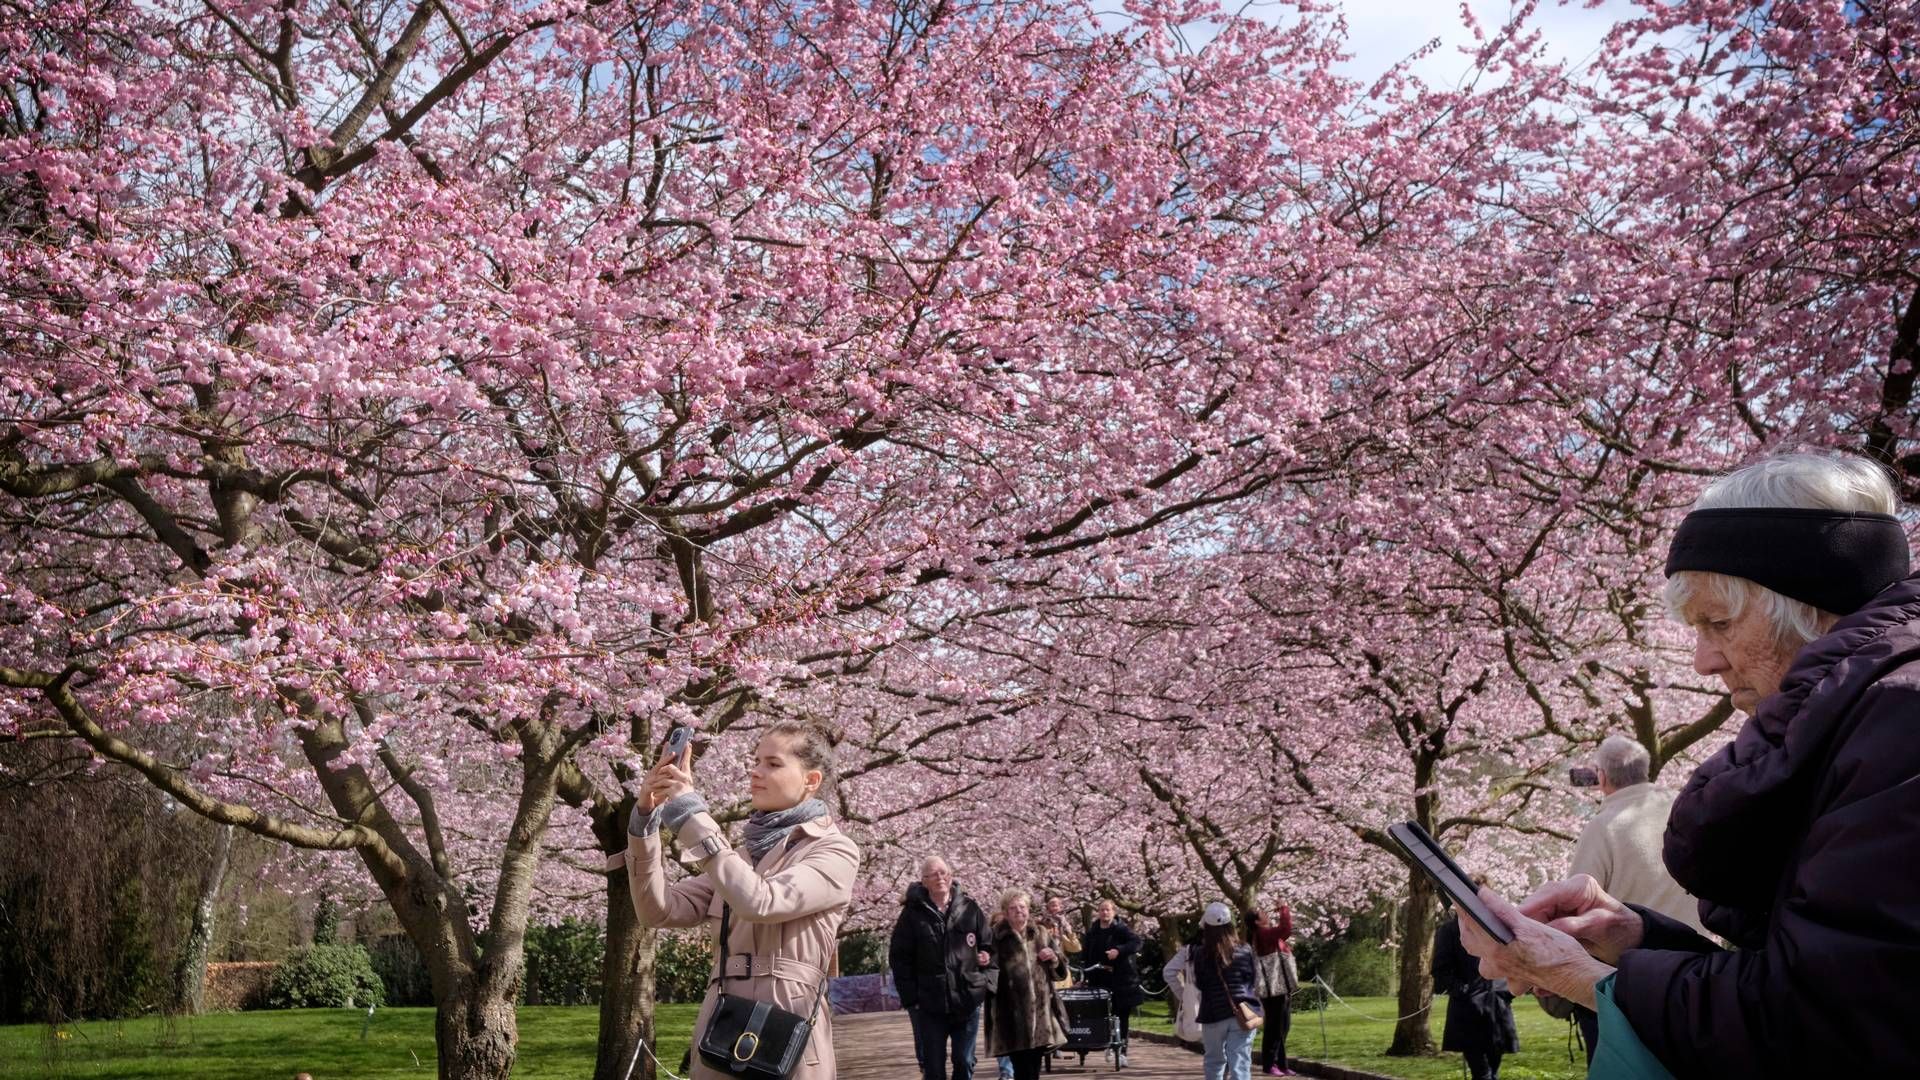 Every year in April, cherry trees blooming attract thousands of visitors to Bispebjerg Cemetary on the outskirts of Copenhagen. | Photo: Jens Dresling/Ritzau Scanpix